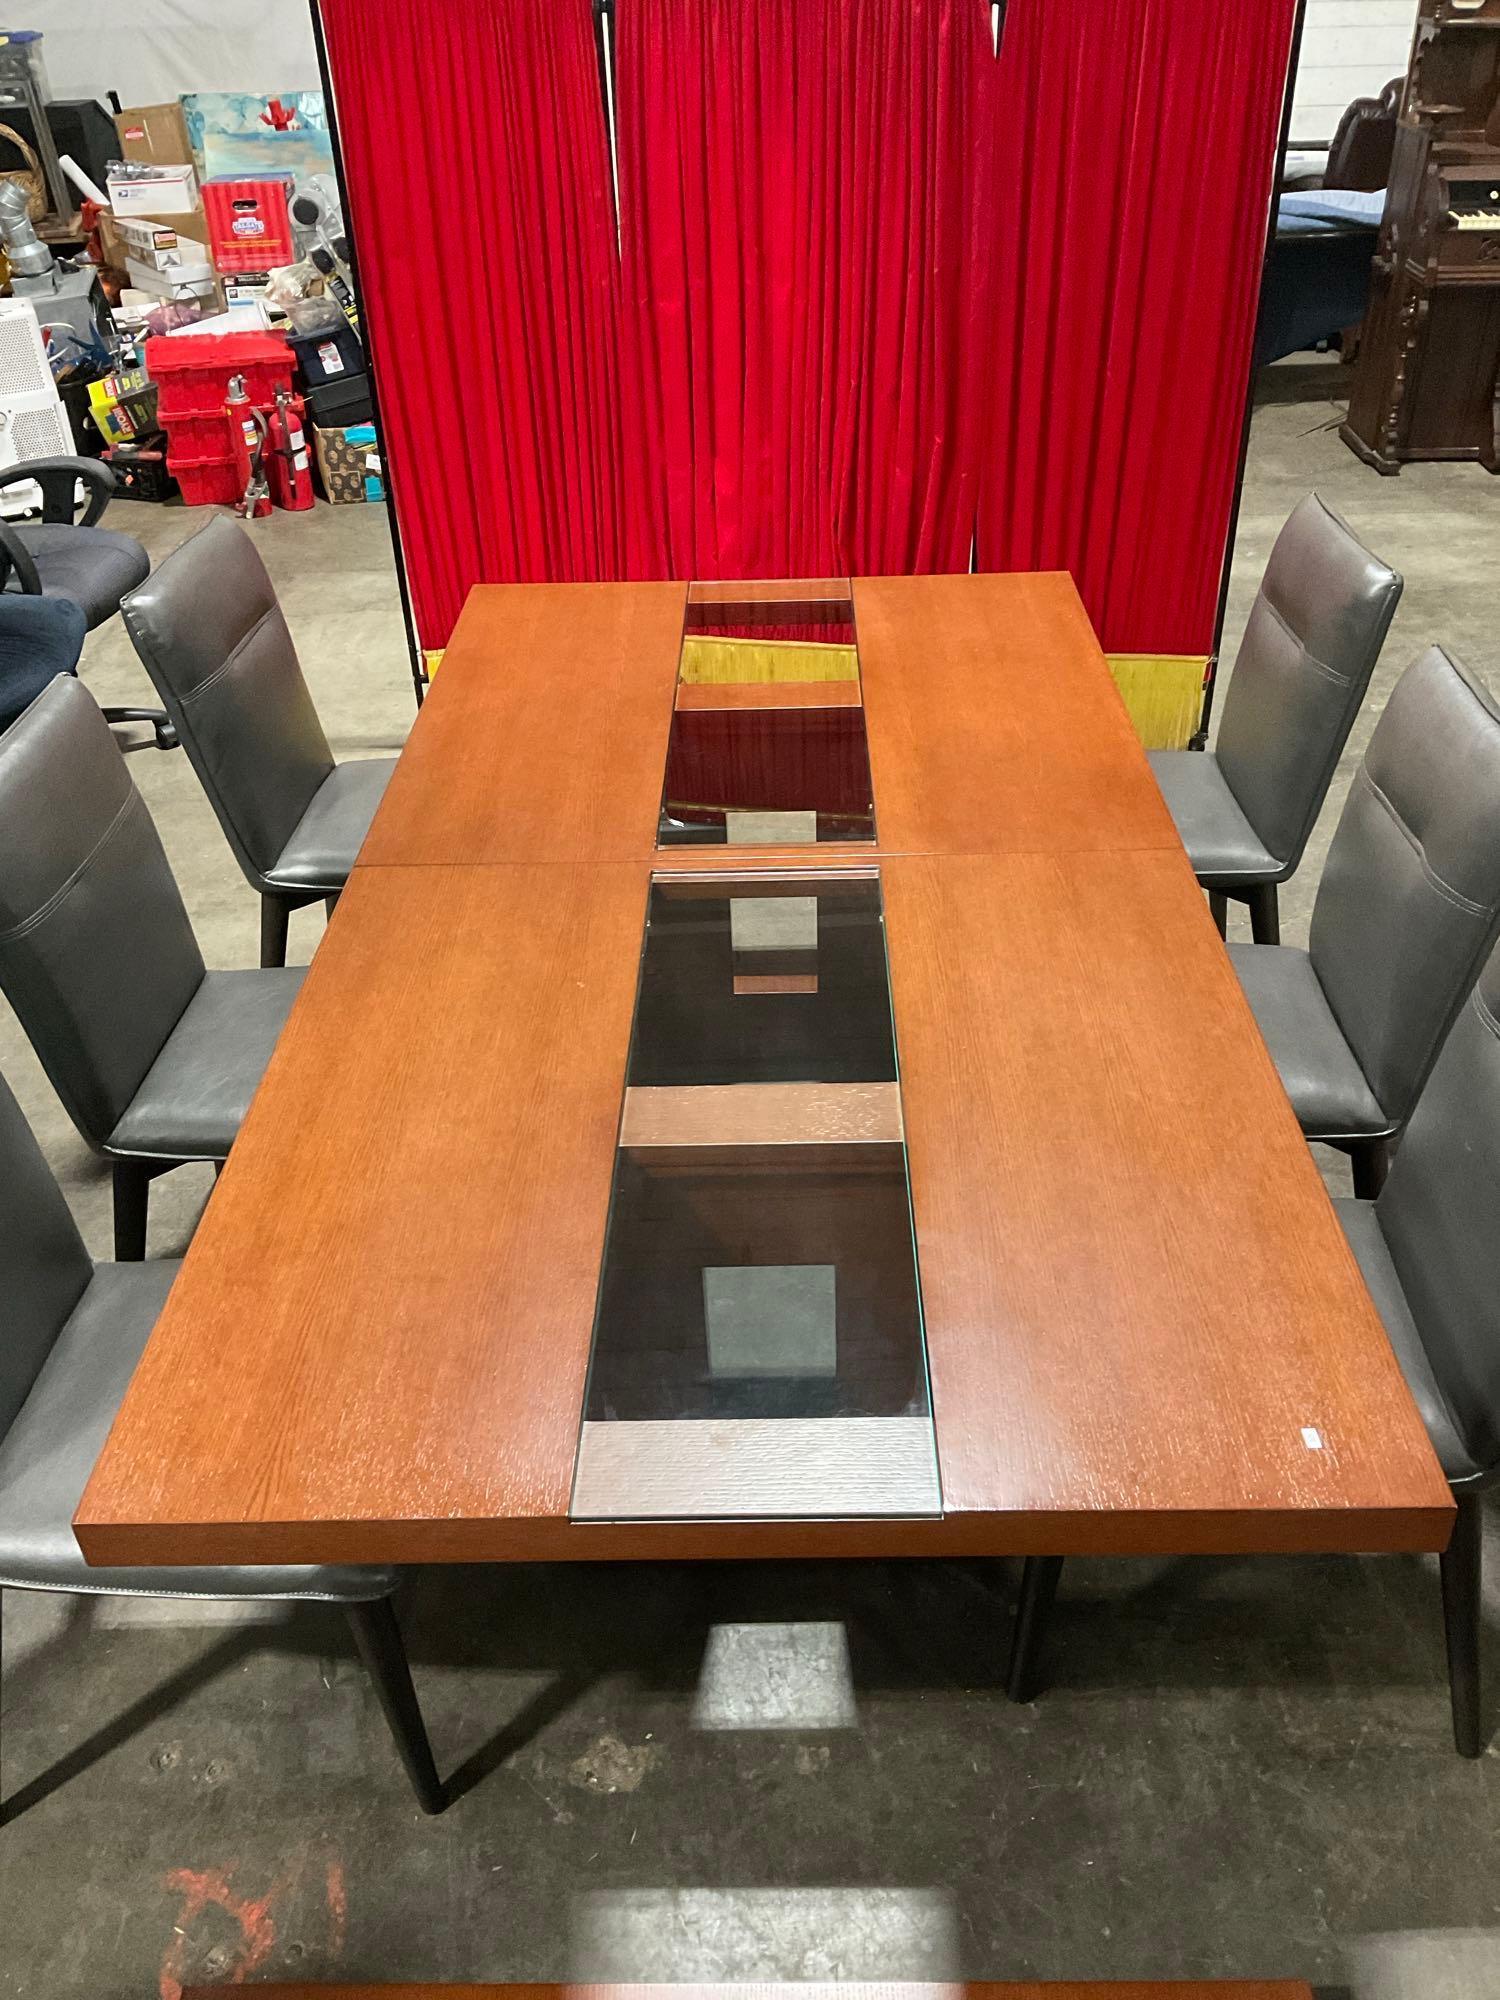 Modern Creative Elegance Oak Veneer Dining Table w/ extra Leaf & 6 Gray Leather Chairs. See pics.